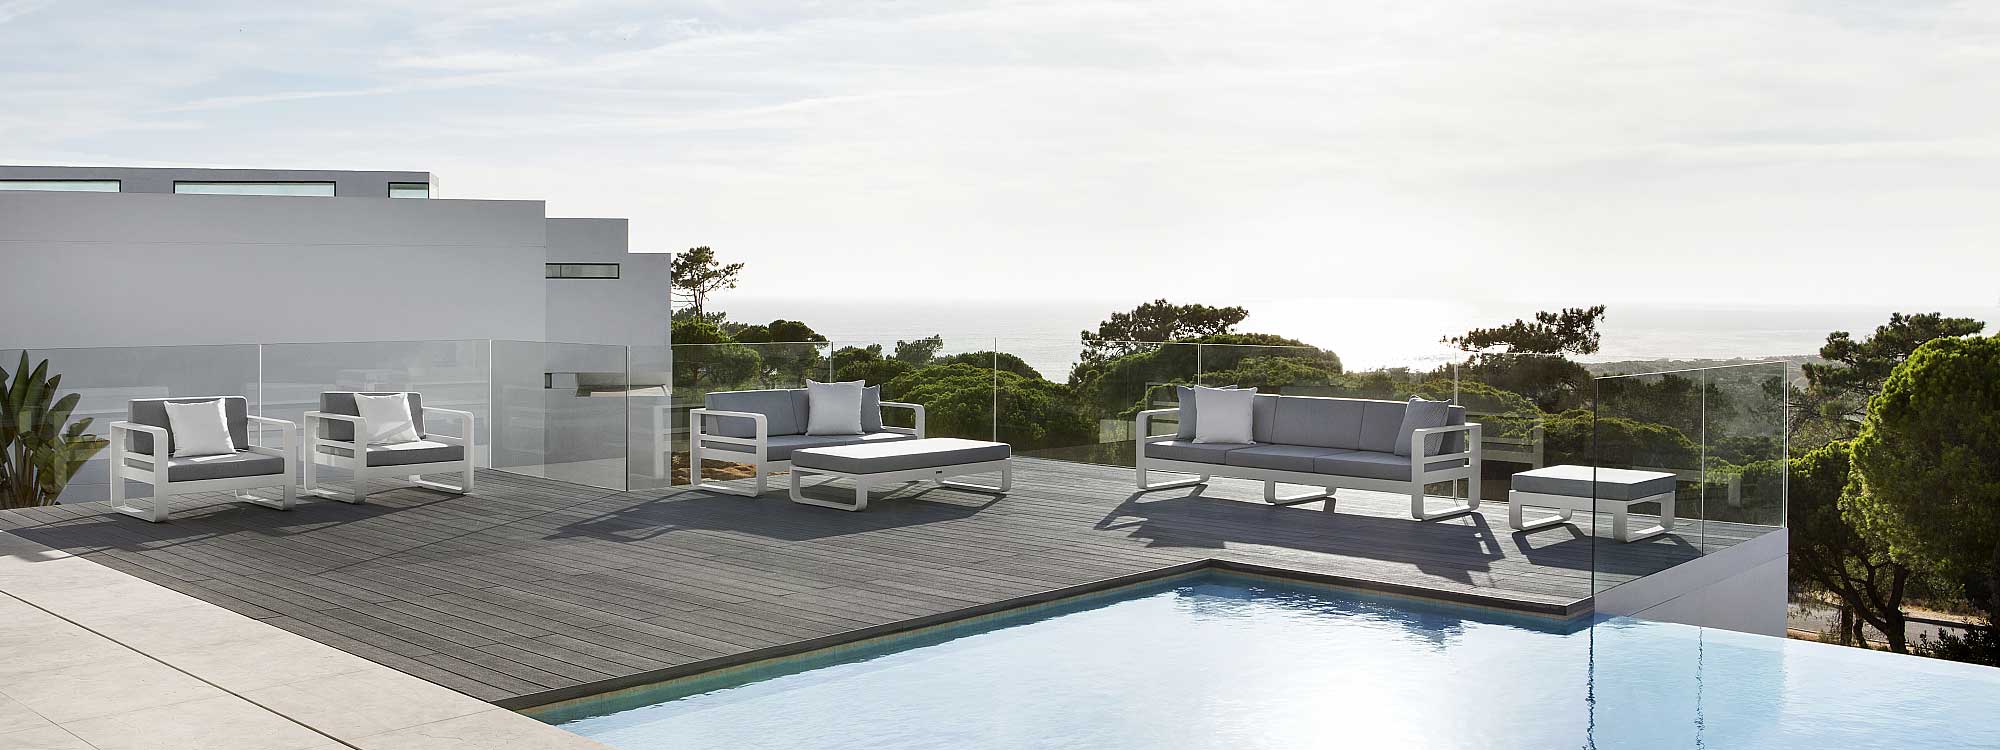 Image of Reno white garden sofas and lounge chairs on a decked poolside, with white-washed building, woodland and sea in the background